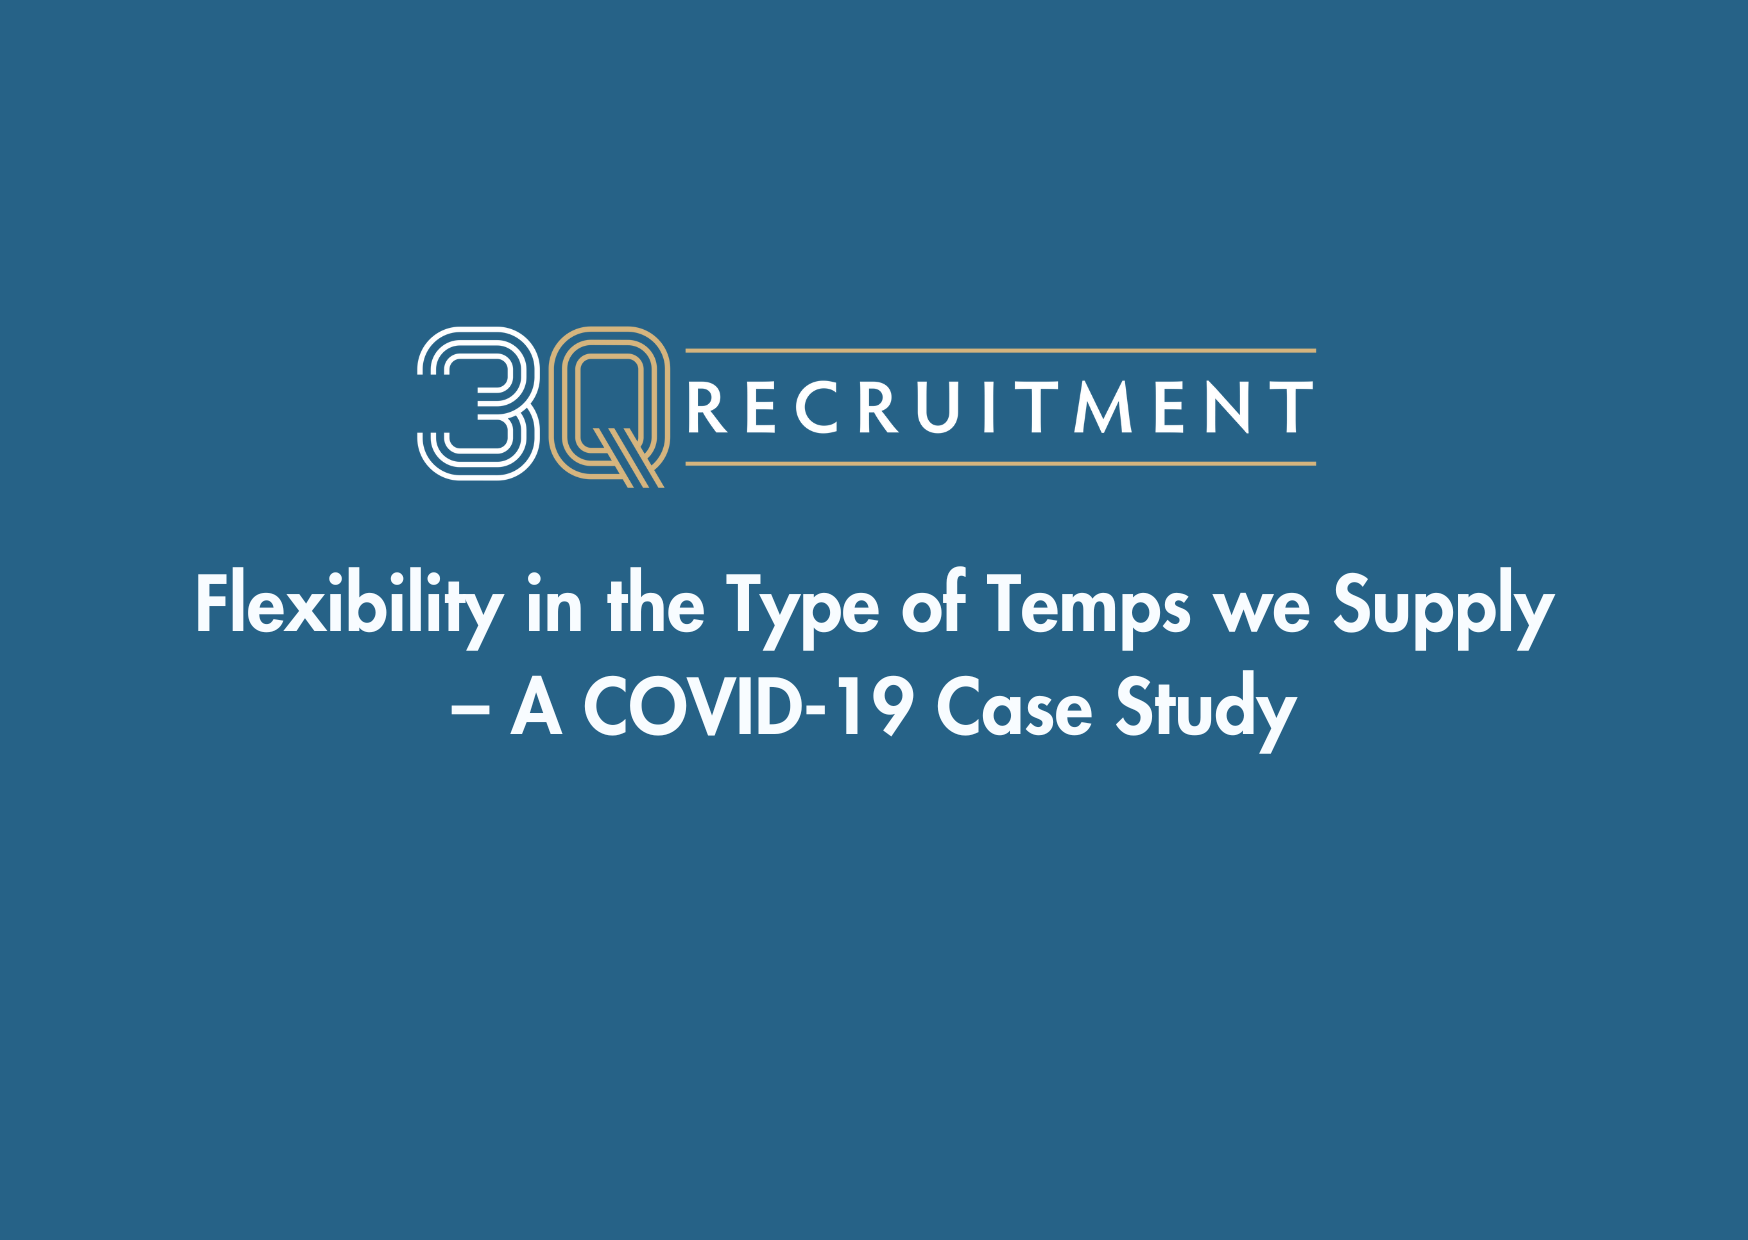 3Q Recruitment Flexibility in the Type of Temps we Supply – A COVID-19 Case Study